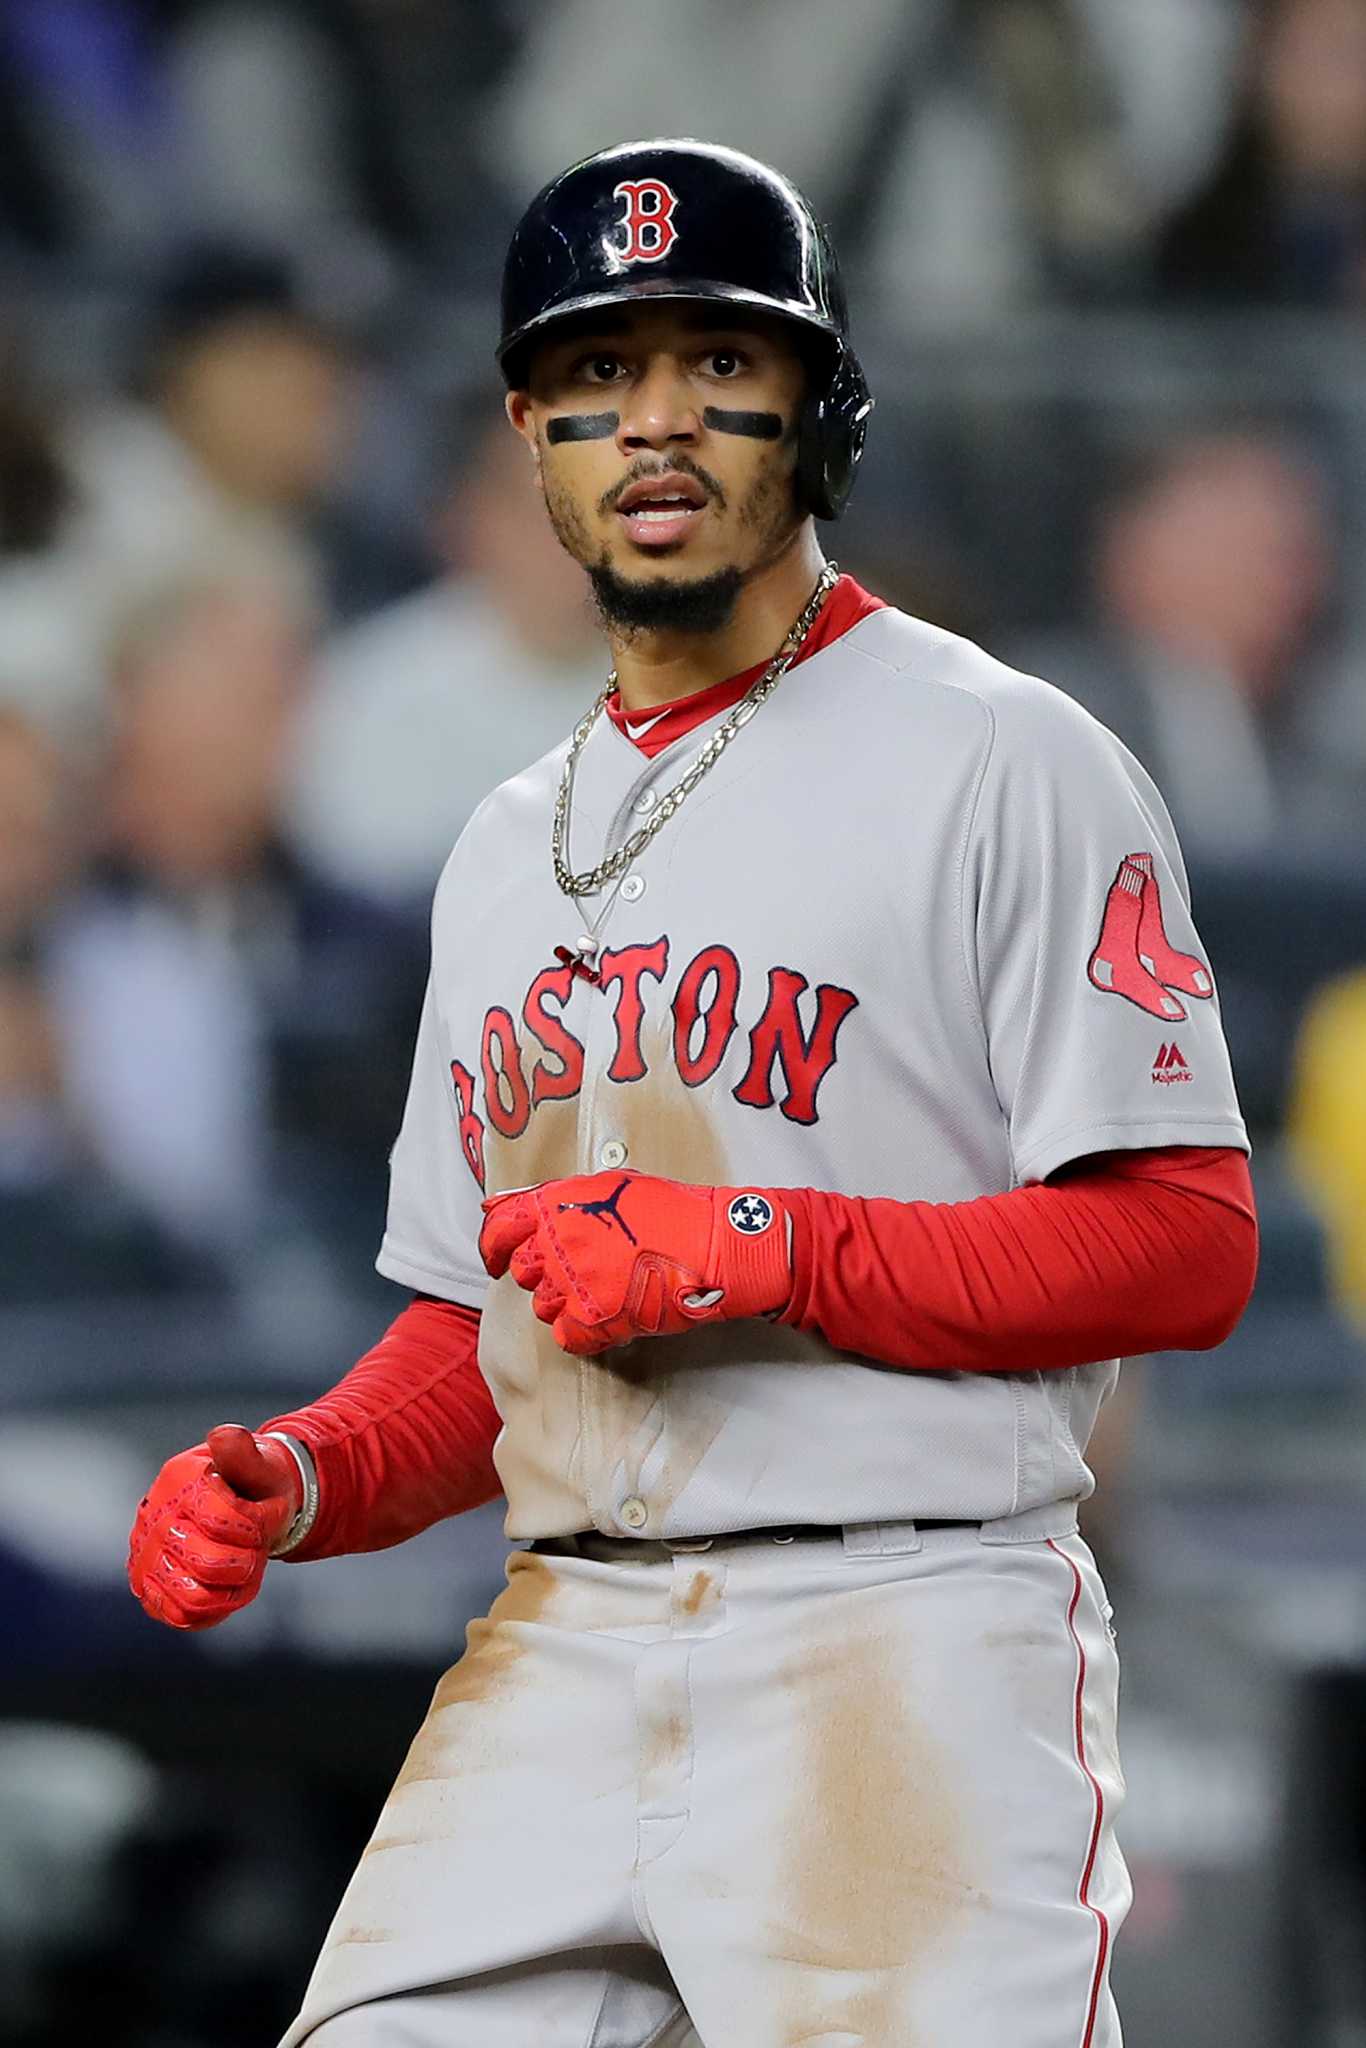 Red Sox might play Betts at second base - Houston Chronicle1366 x 2048